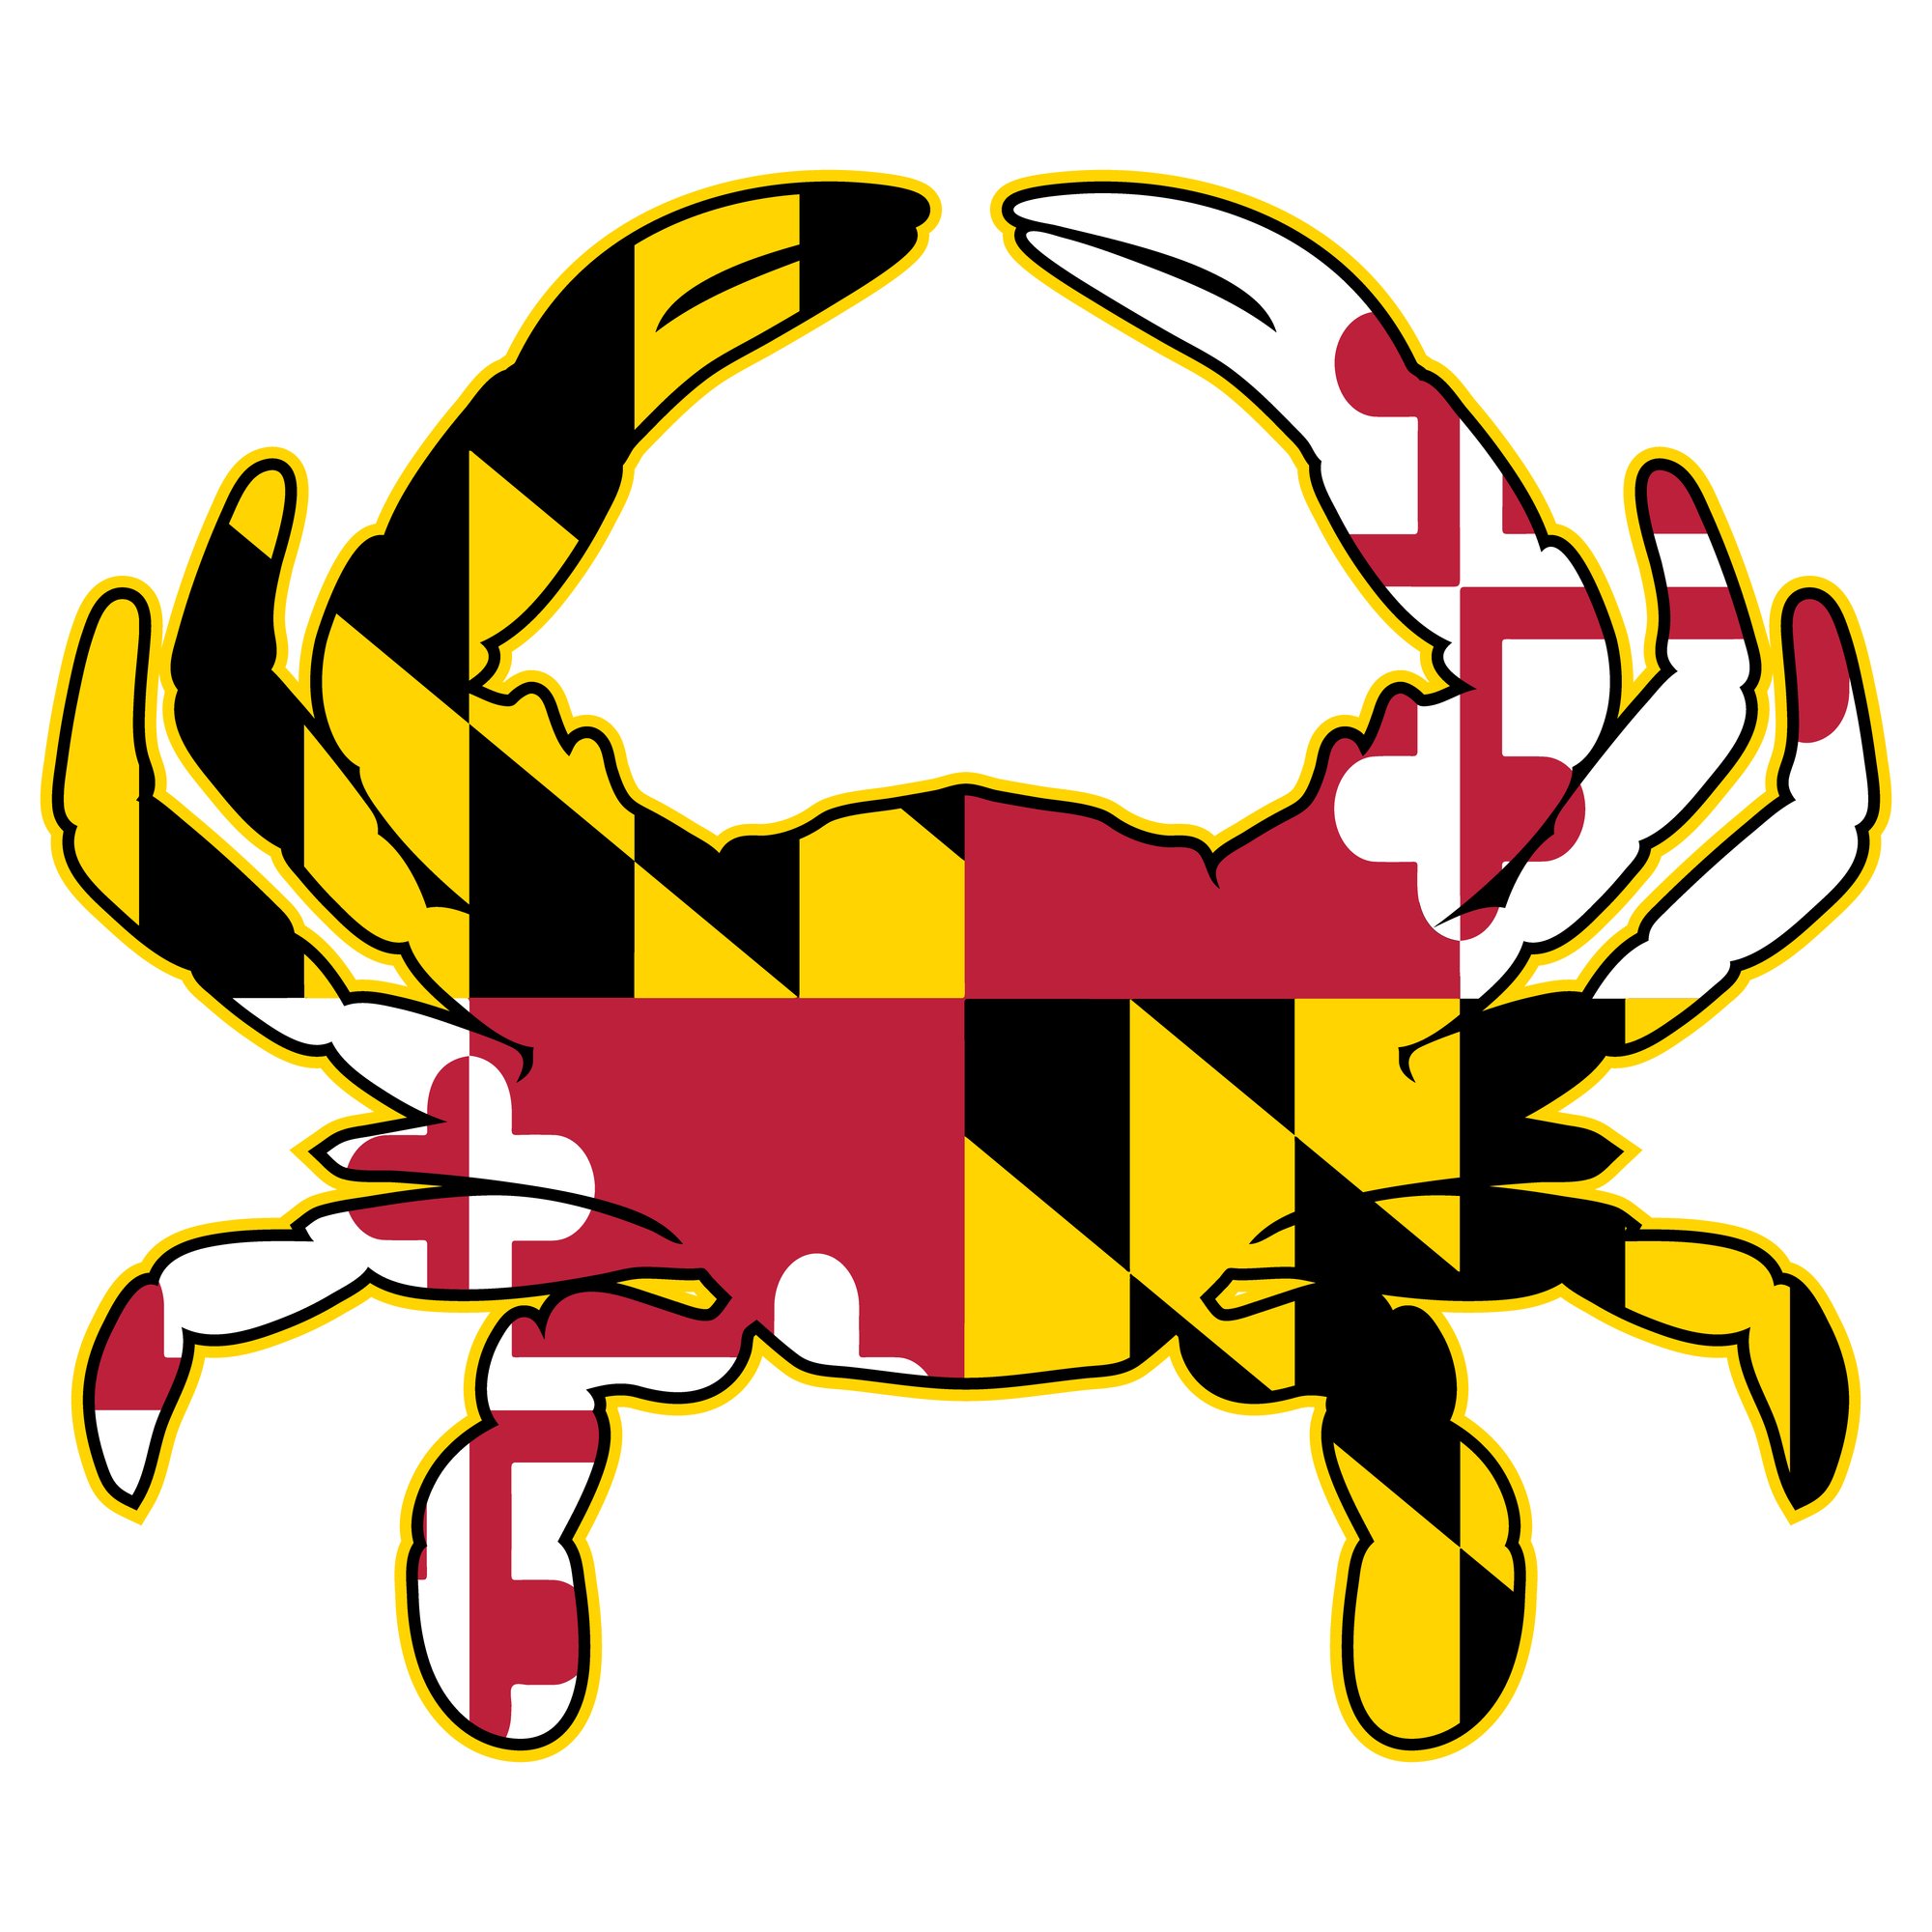 Celebrate Maryland Day Festival with a unique crab featuring the iconic Maryland flag.